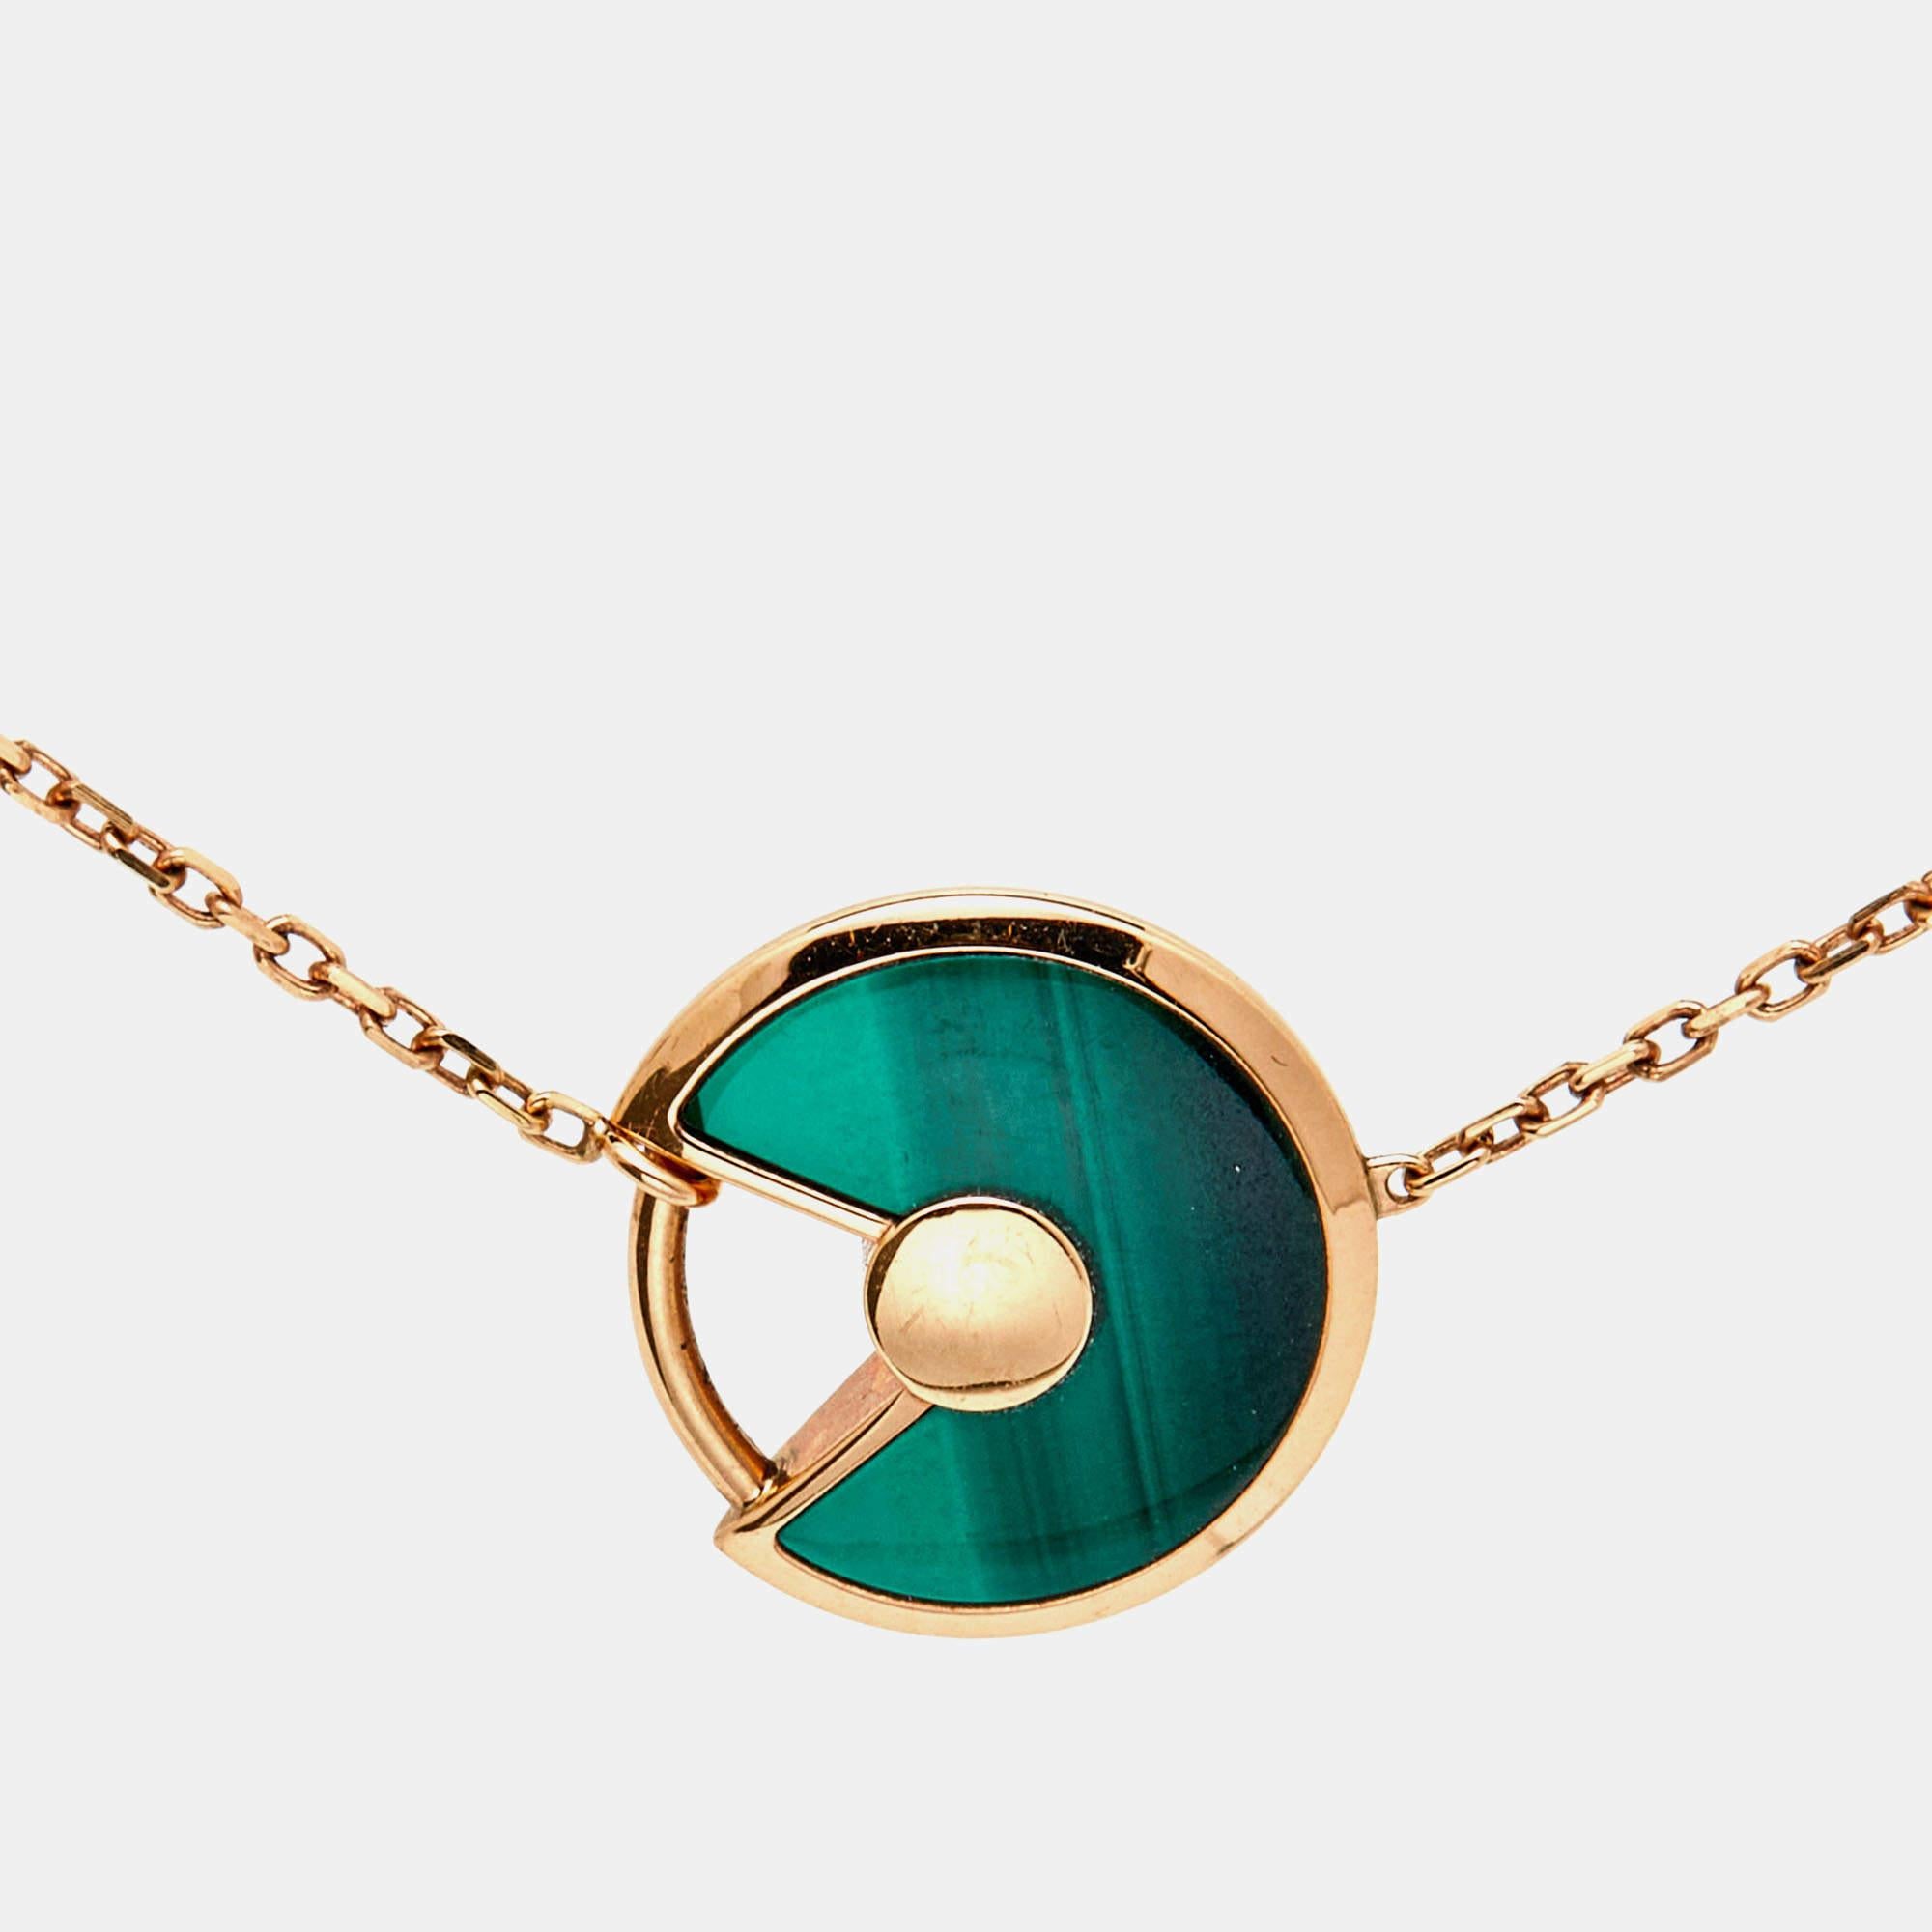 A minimal yet magnificent offering from Cartier's Amulette de Cartier line. The bracelet comes sculpted in 18k rose gold, and it has the signature motif in malachite highlighted by a shimmering diamond. Smoothly finished, the desirable creation